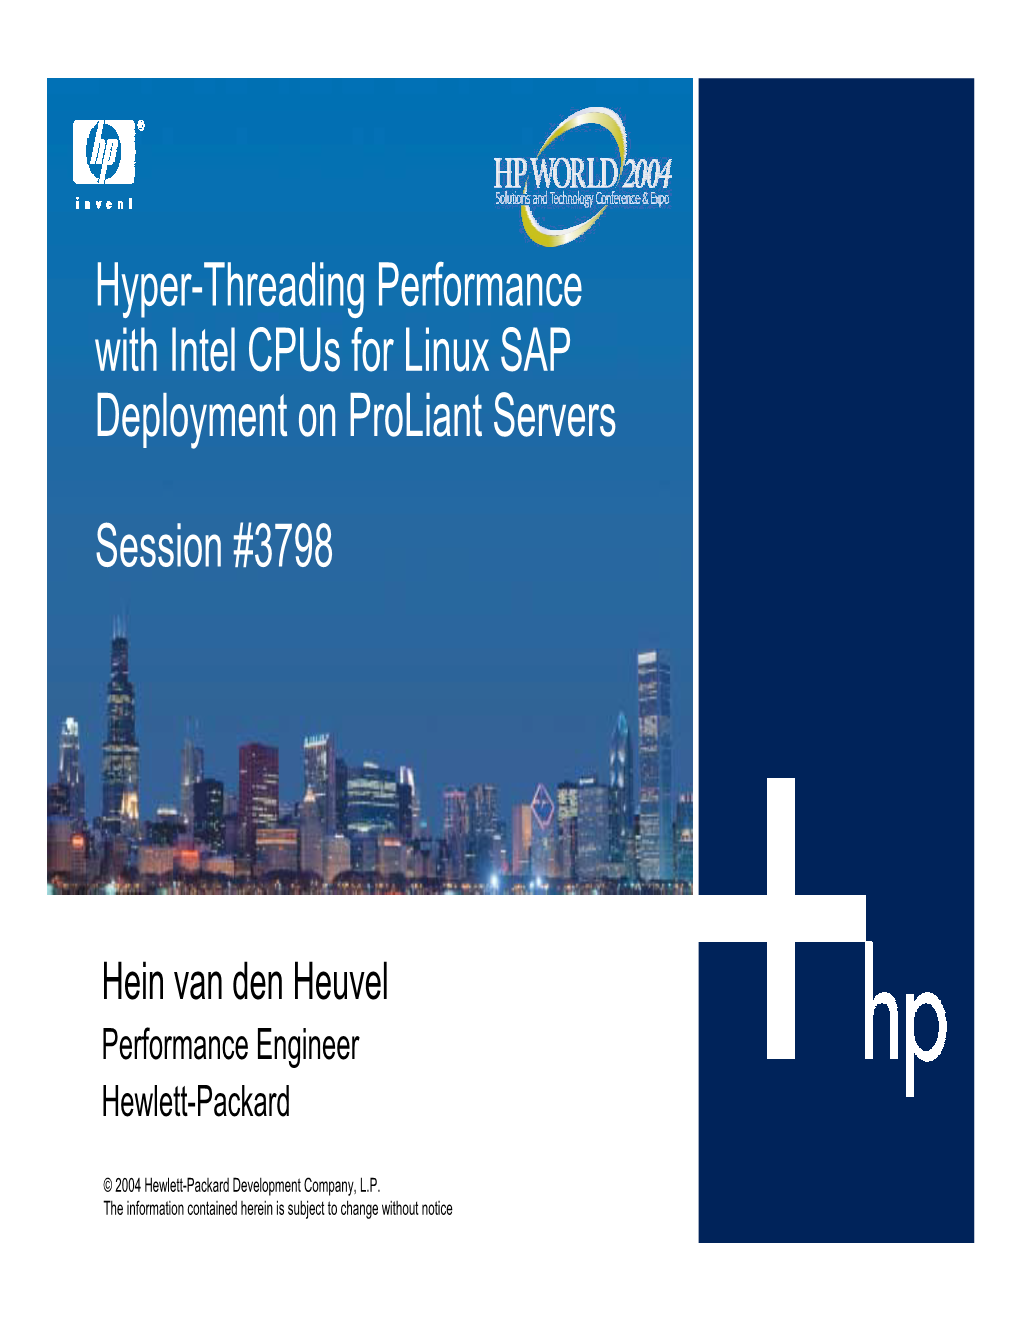 Hyper-Threading Performance with Intel Cpus for Linux SAP Deployment on Proliant Servers